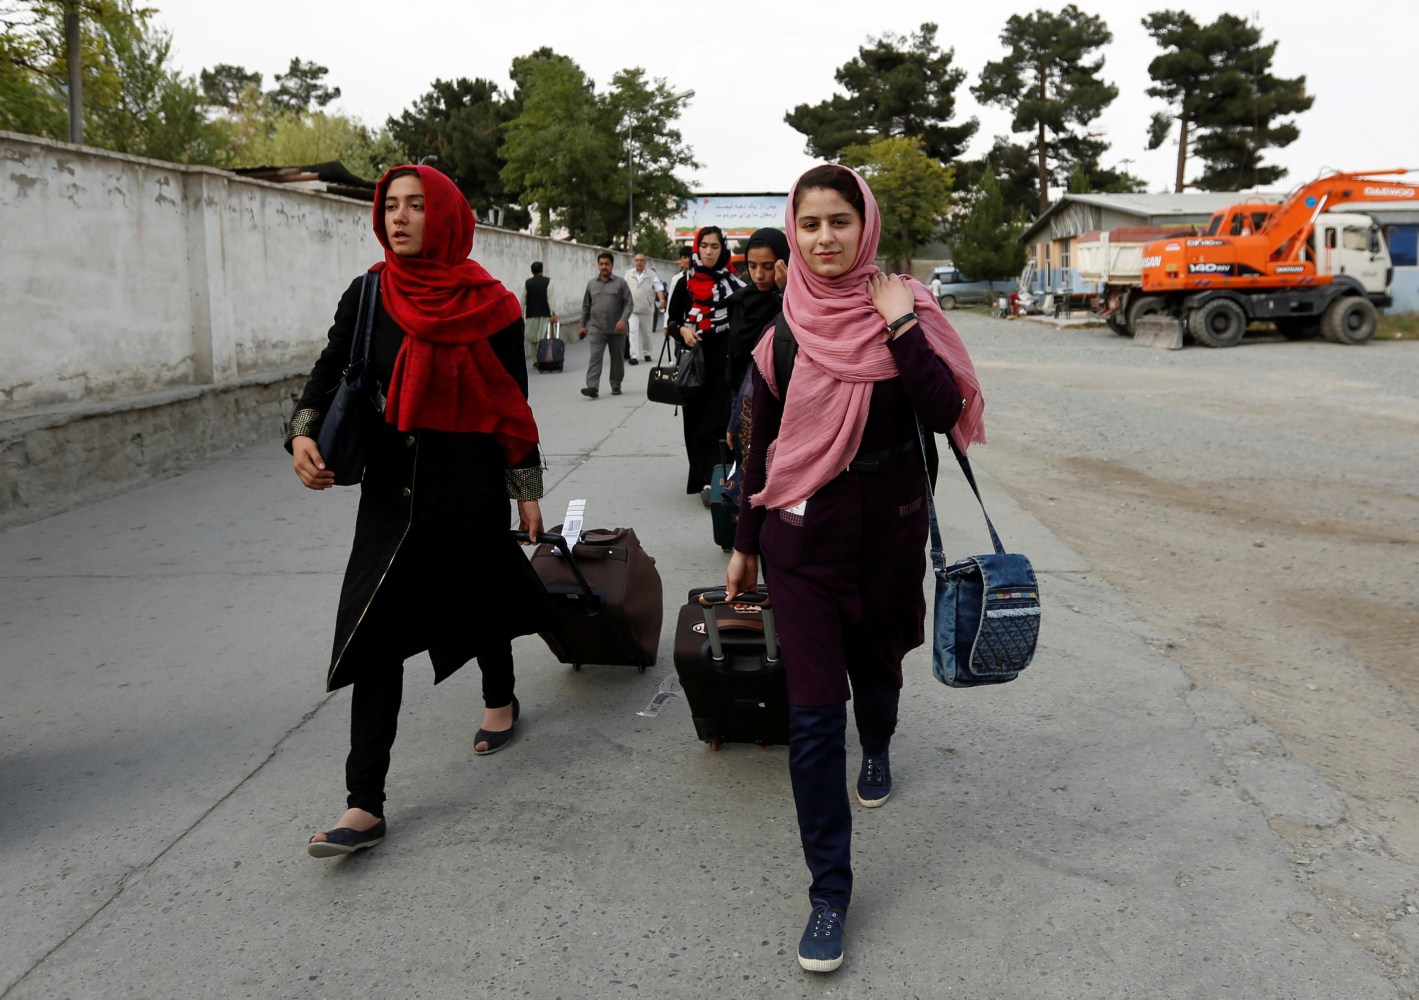 Afghan all-girl robotics team gains entry to the United States